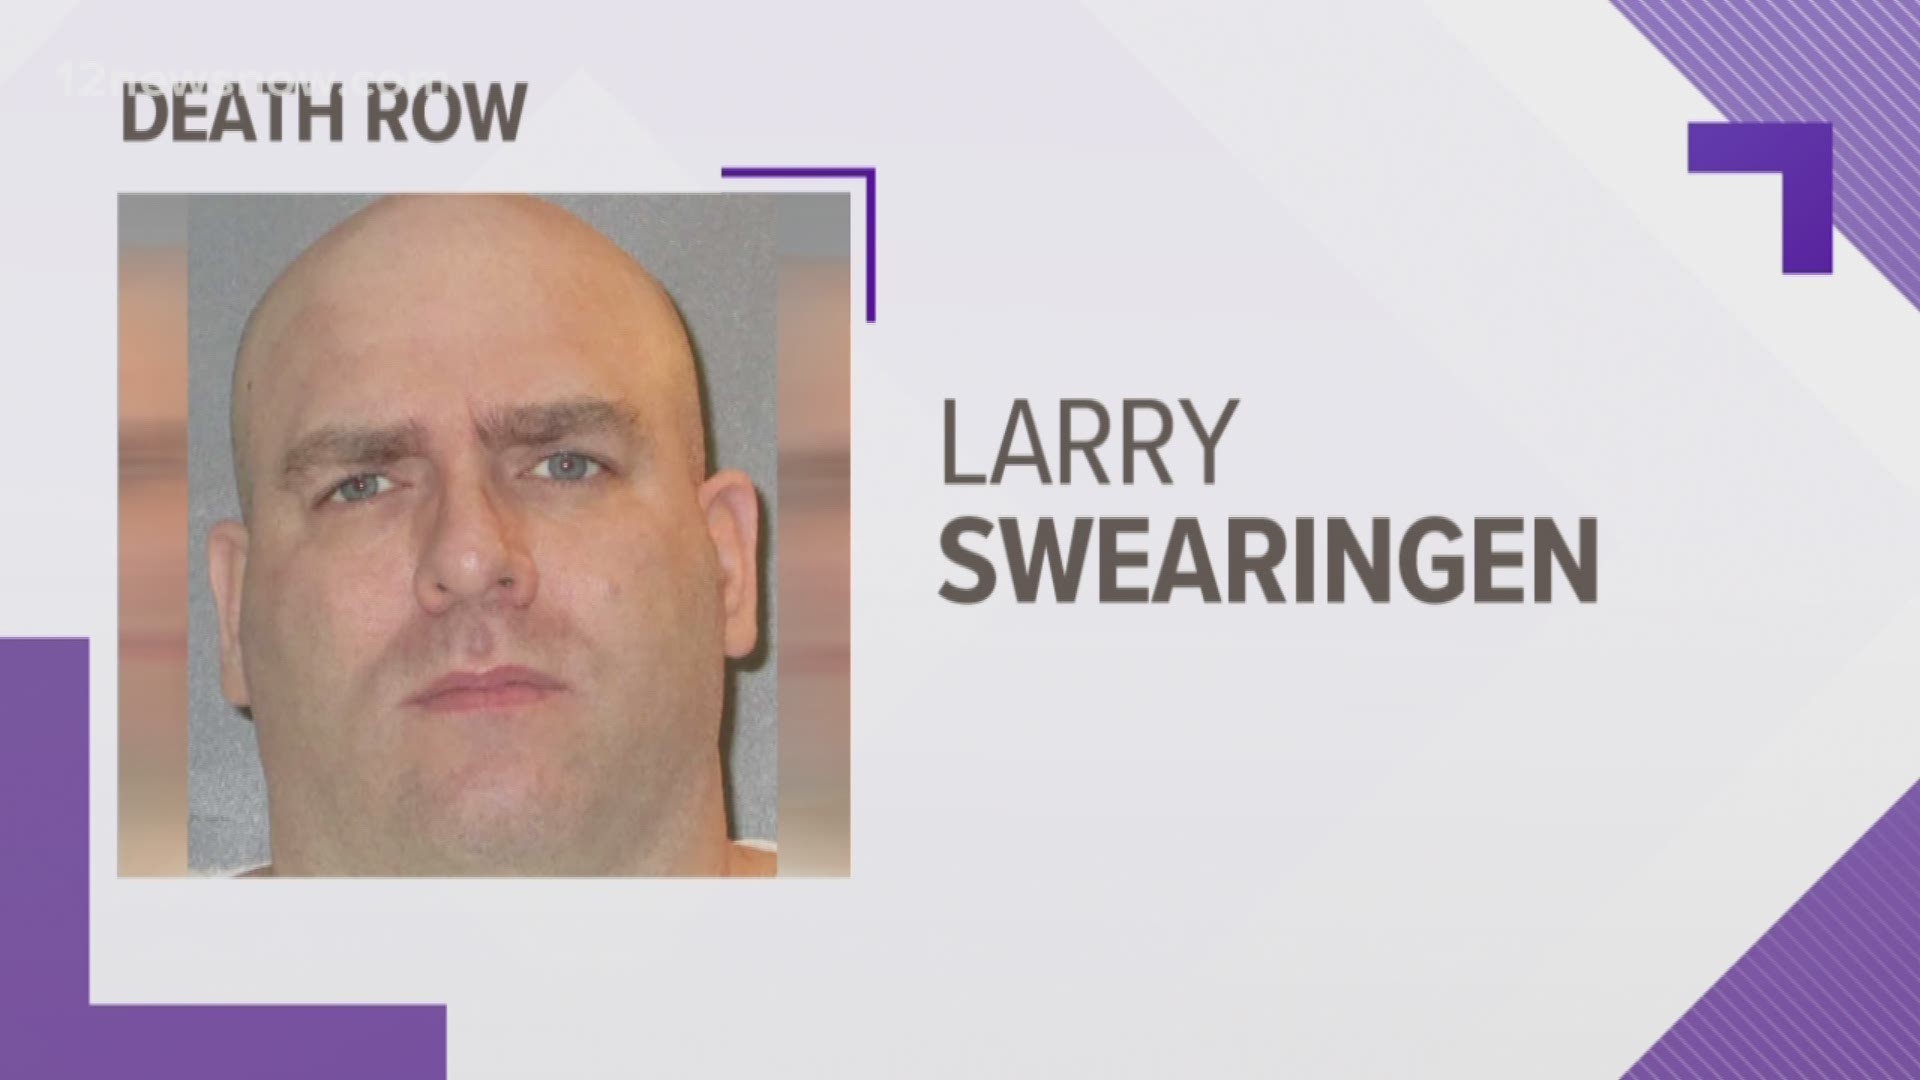 Larry Swearingen was executed on Wednesday.